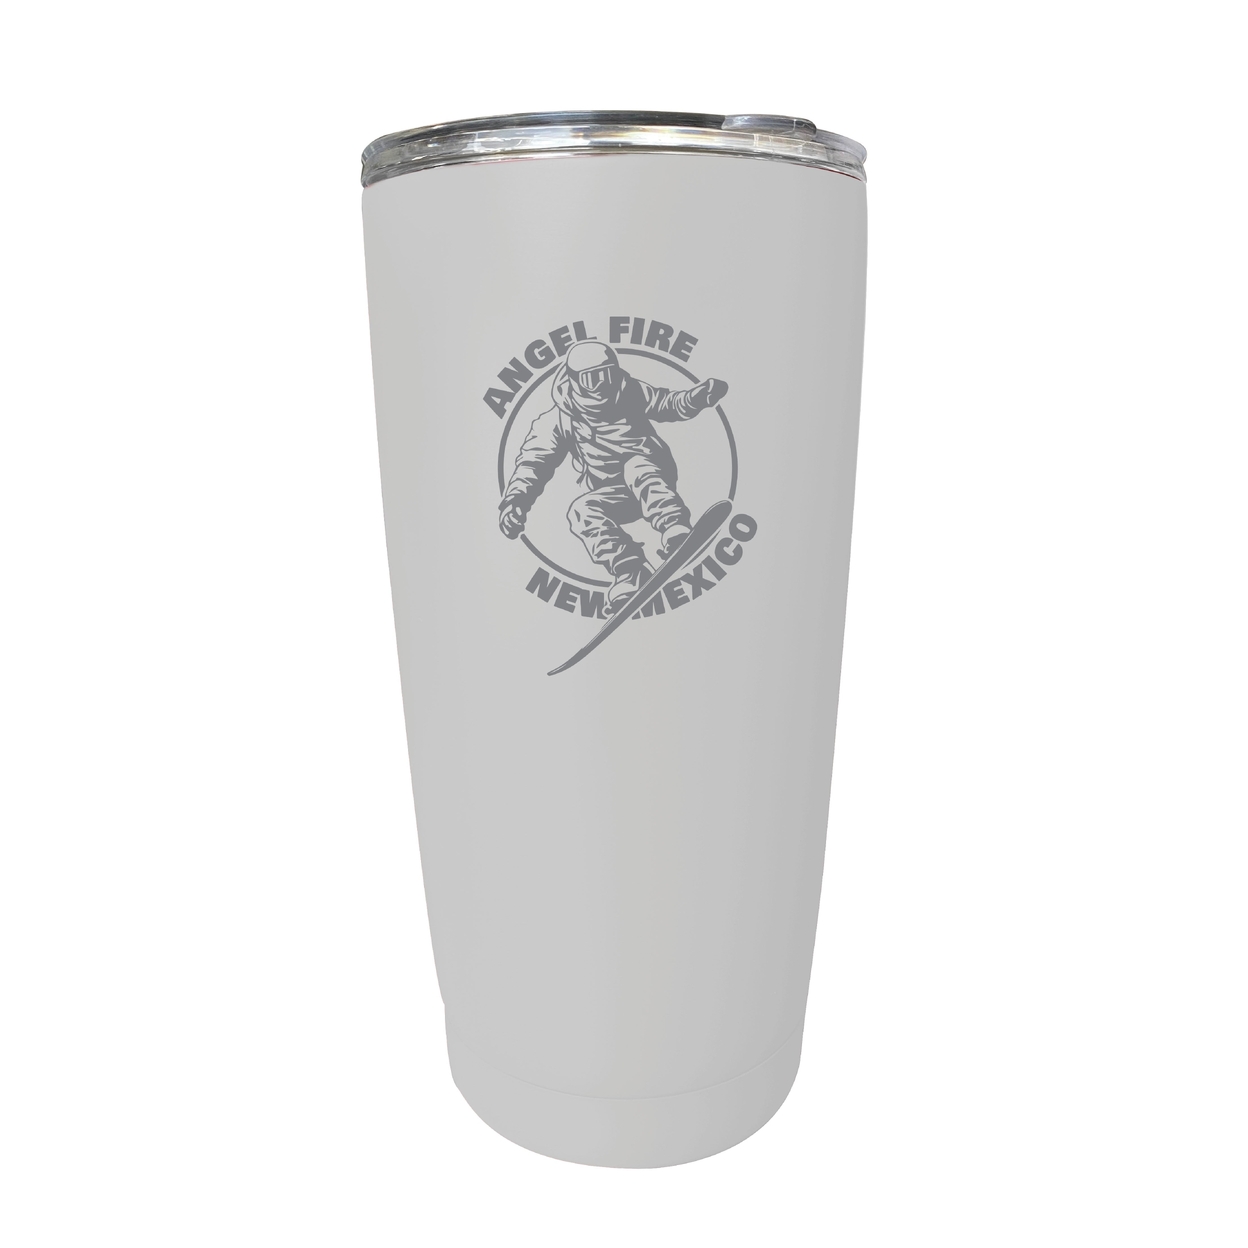 Angel Fire New Mexico Souvenir 16 Oz Engraved Stainless Steel Insulated Tumbler - Purple,,Single Unit